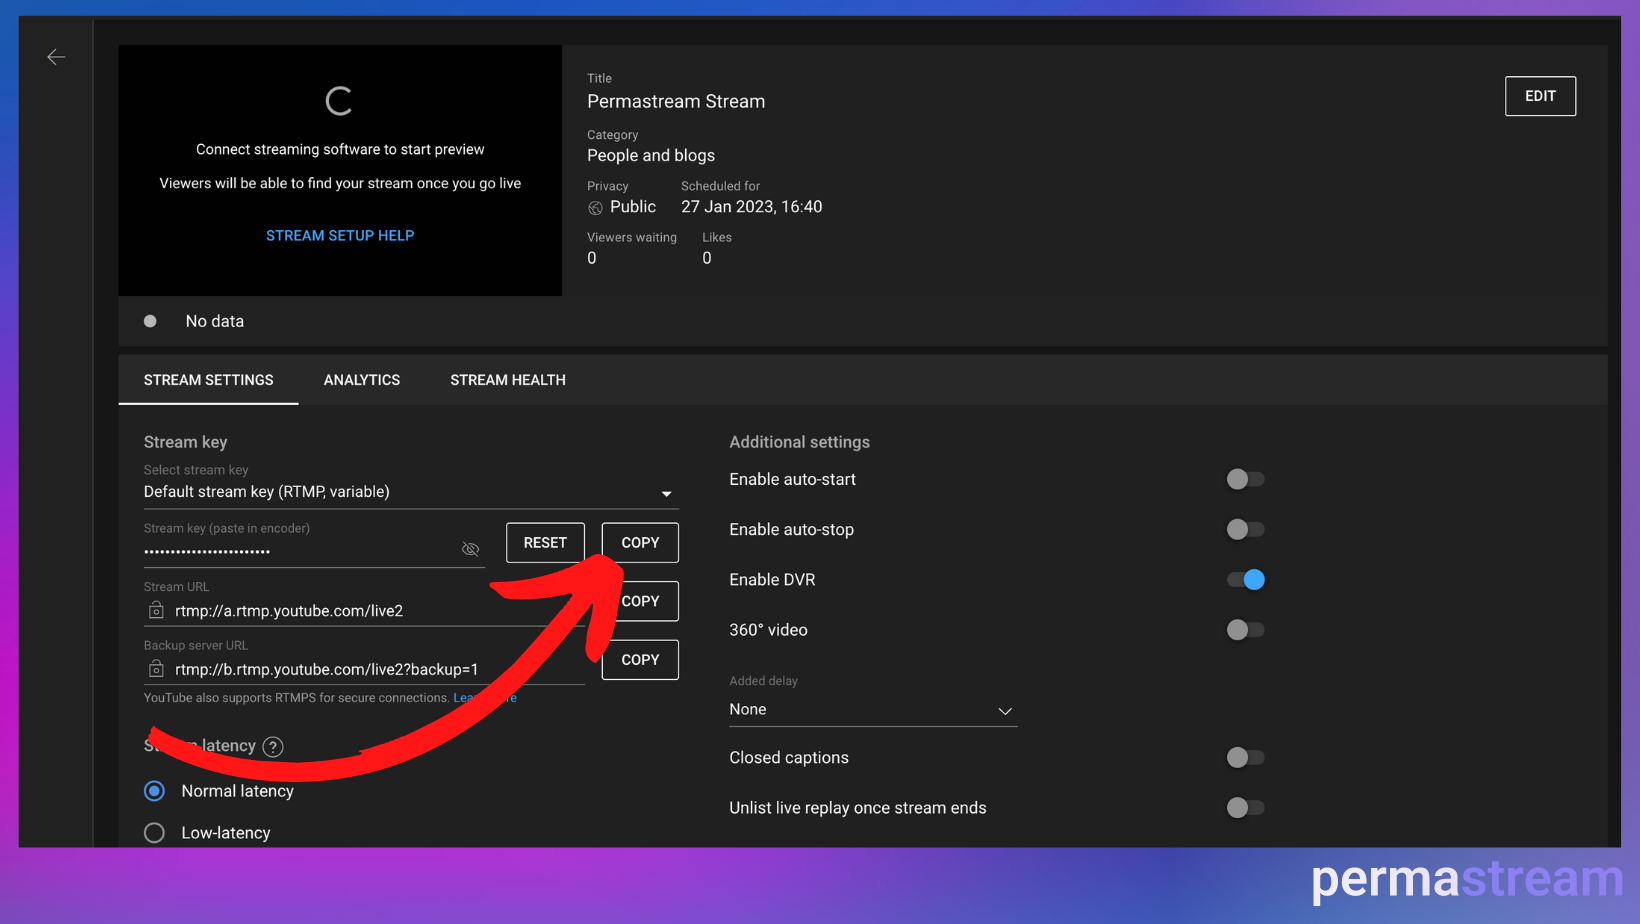 How to Add Your Stream Key To Permastream